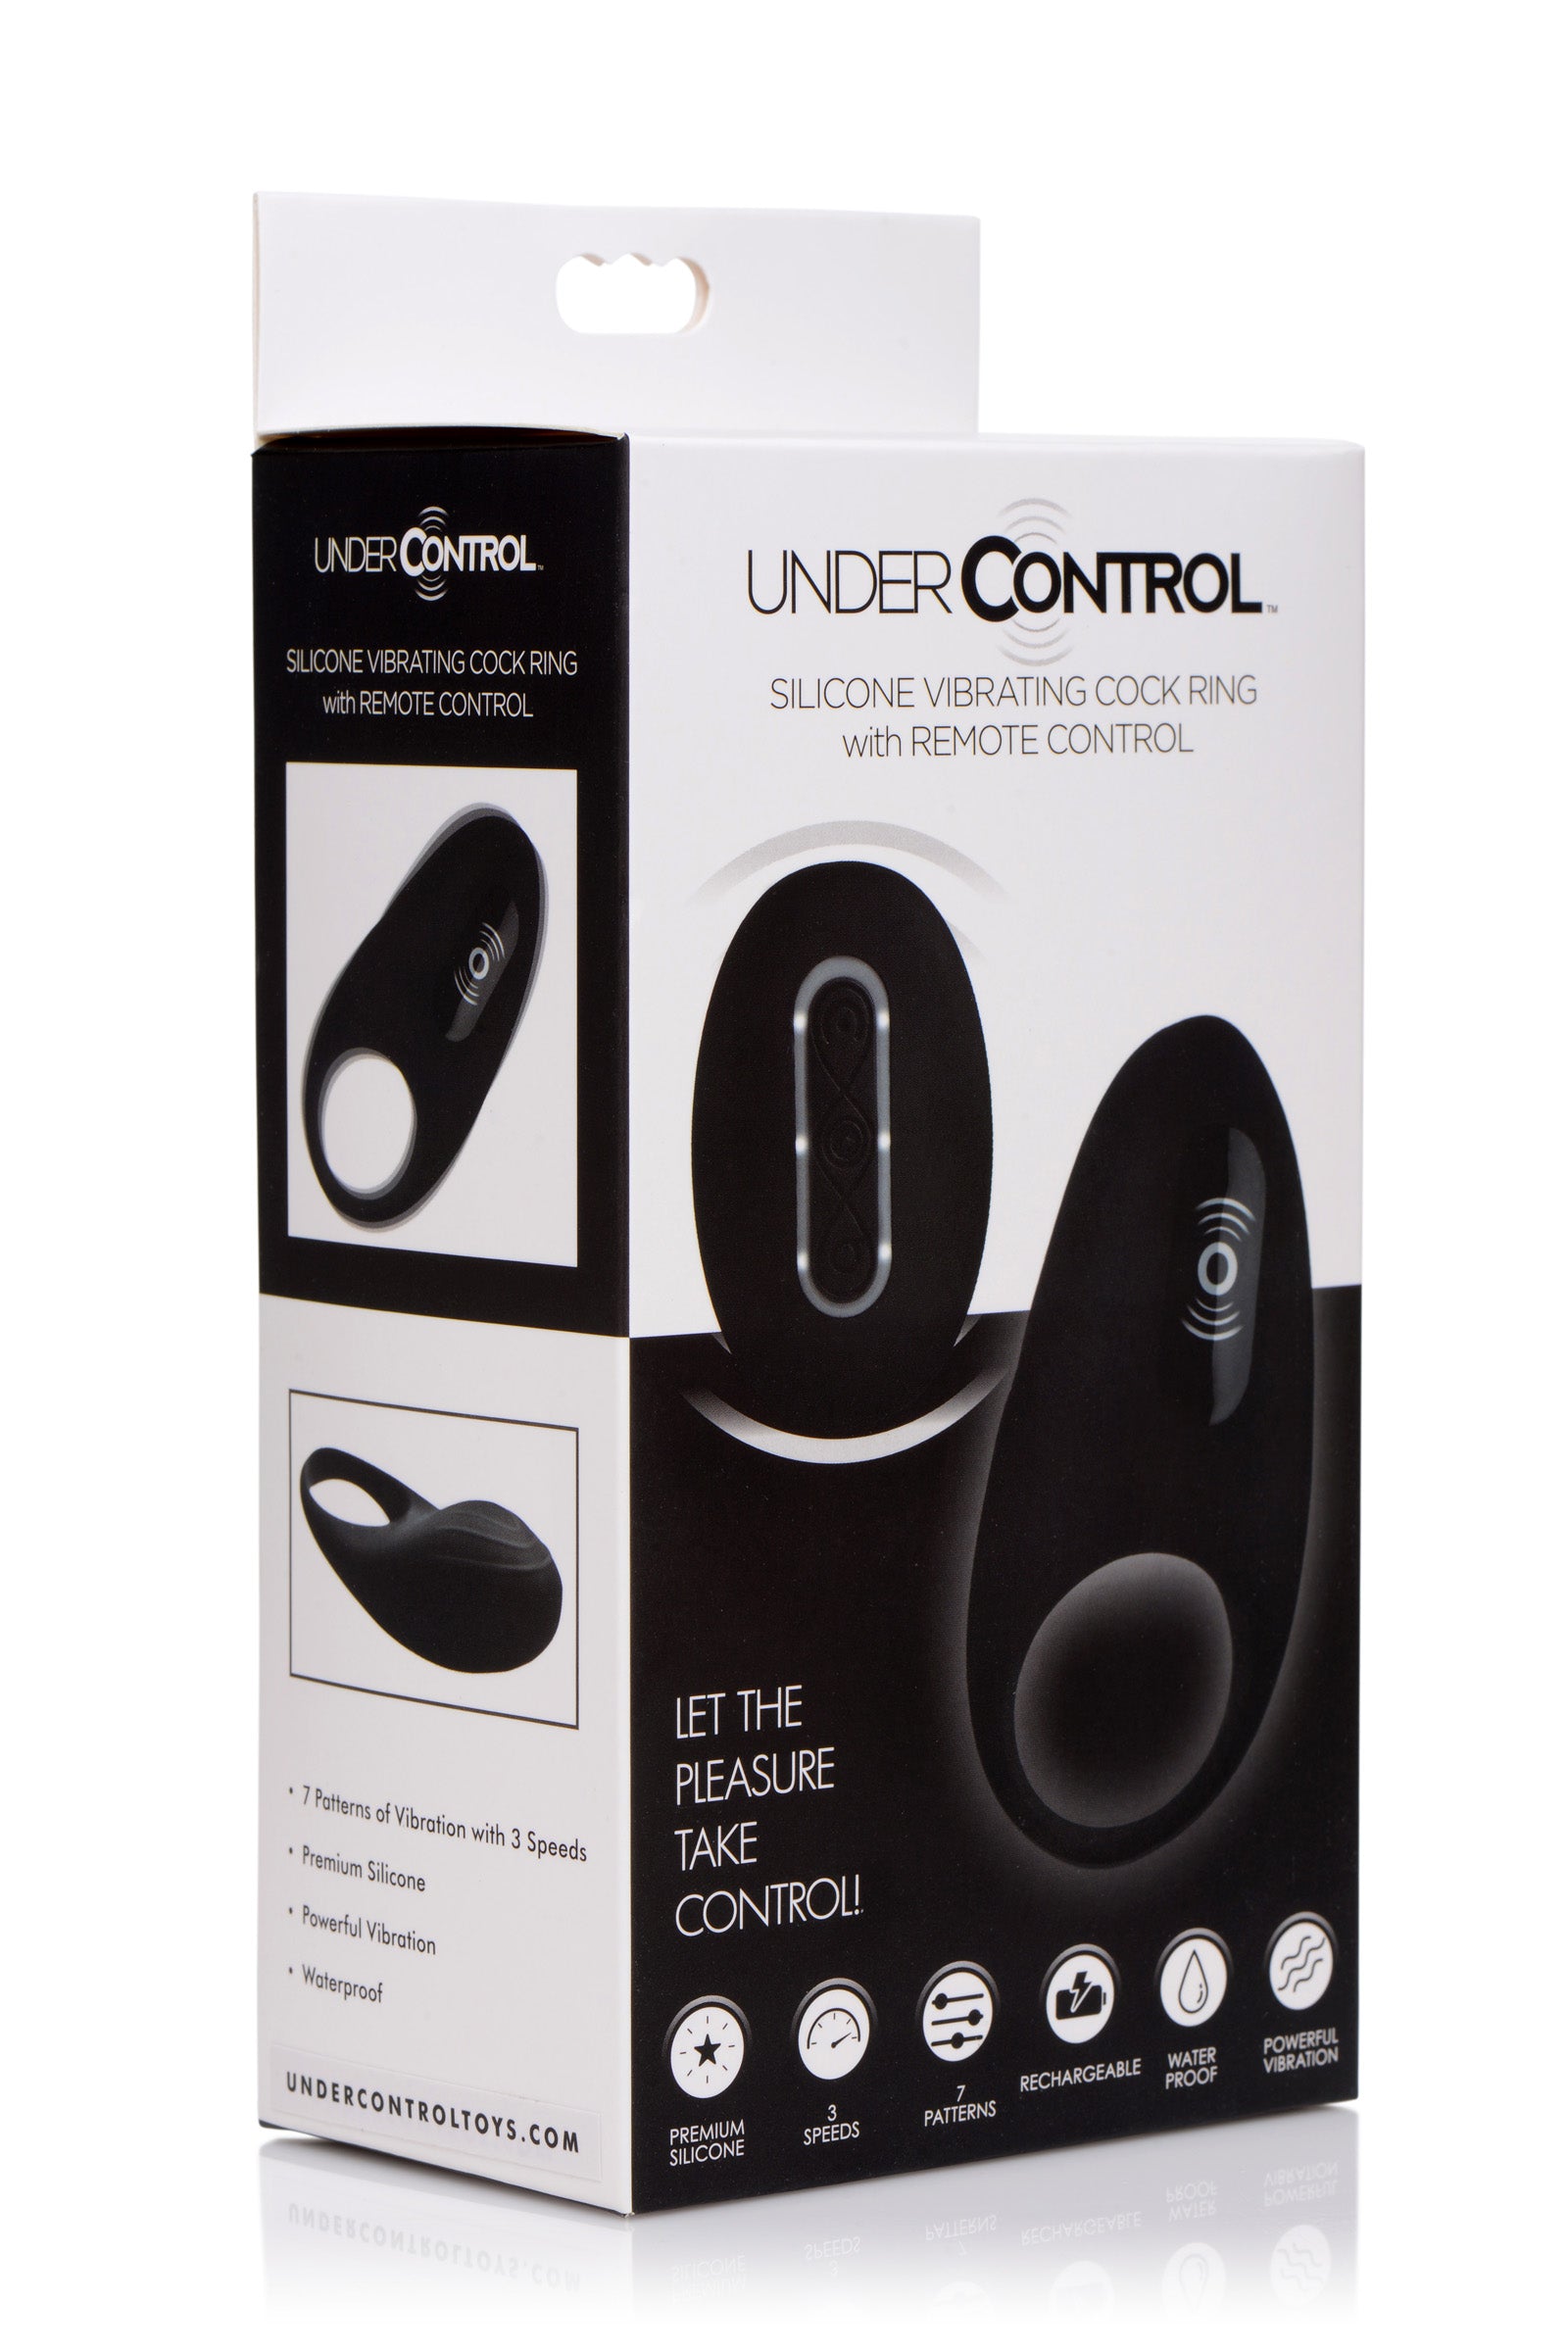 Silicone Vibrating Cock Ring with Remote Control - UABDSM